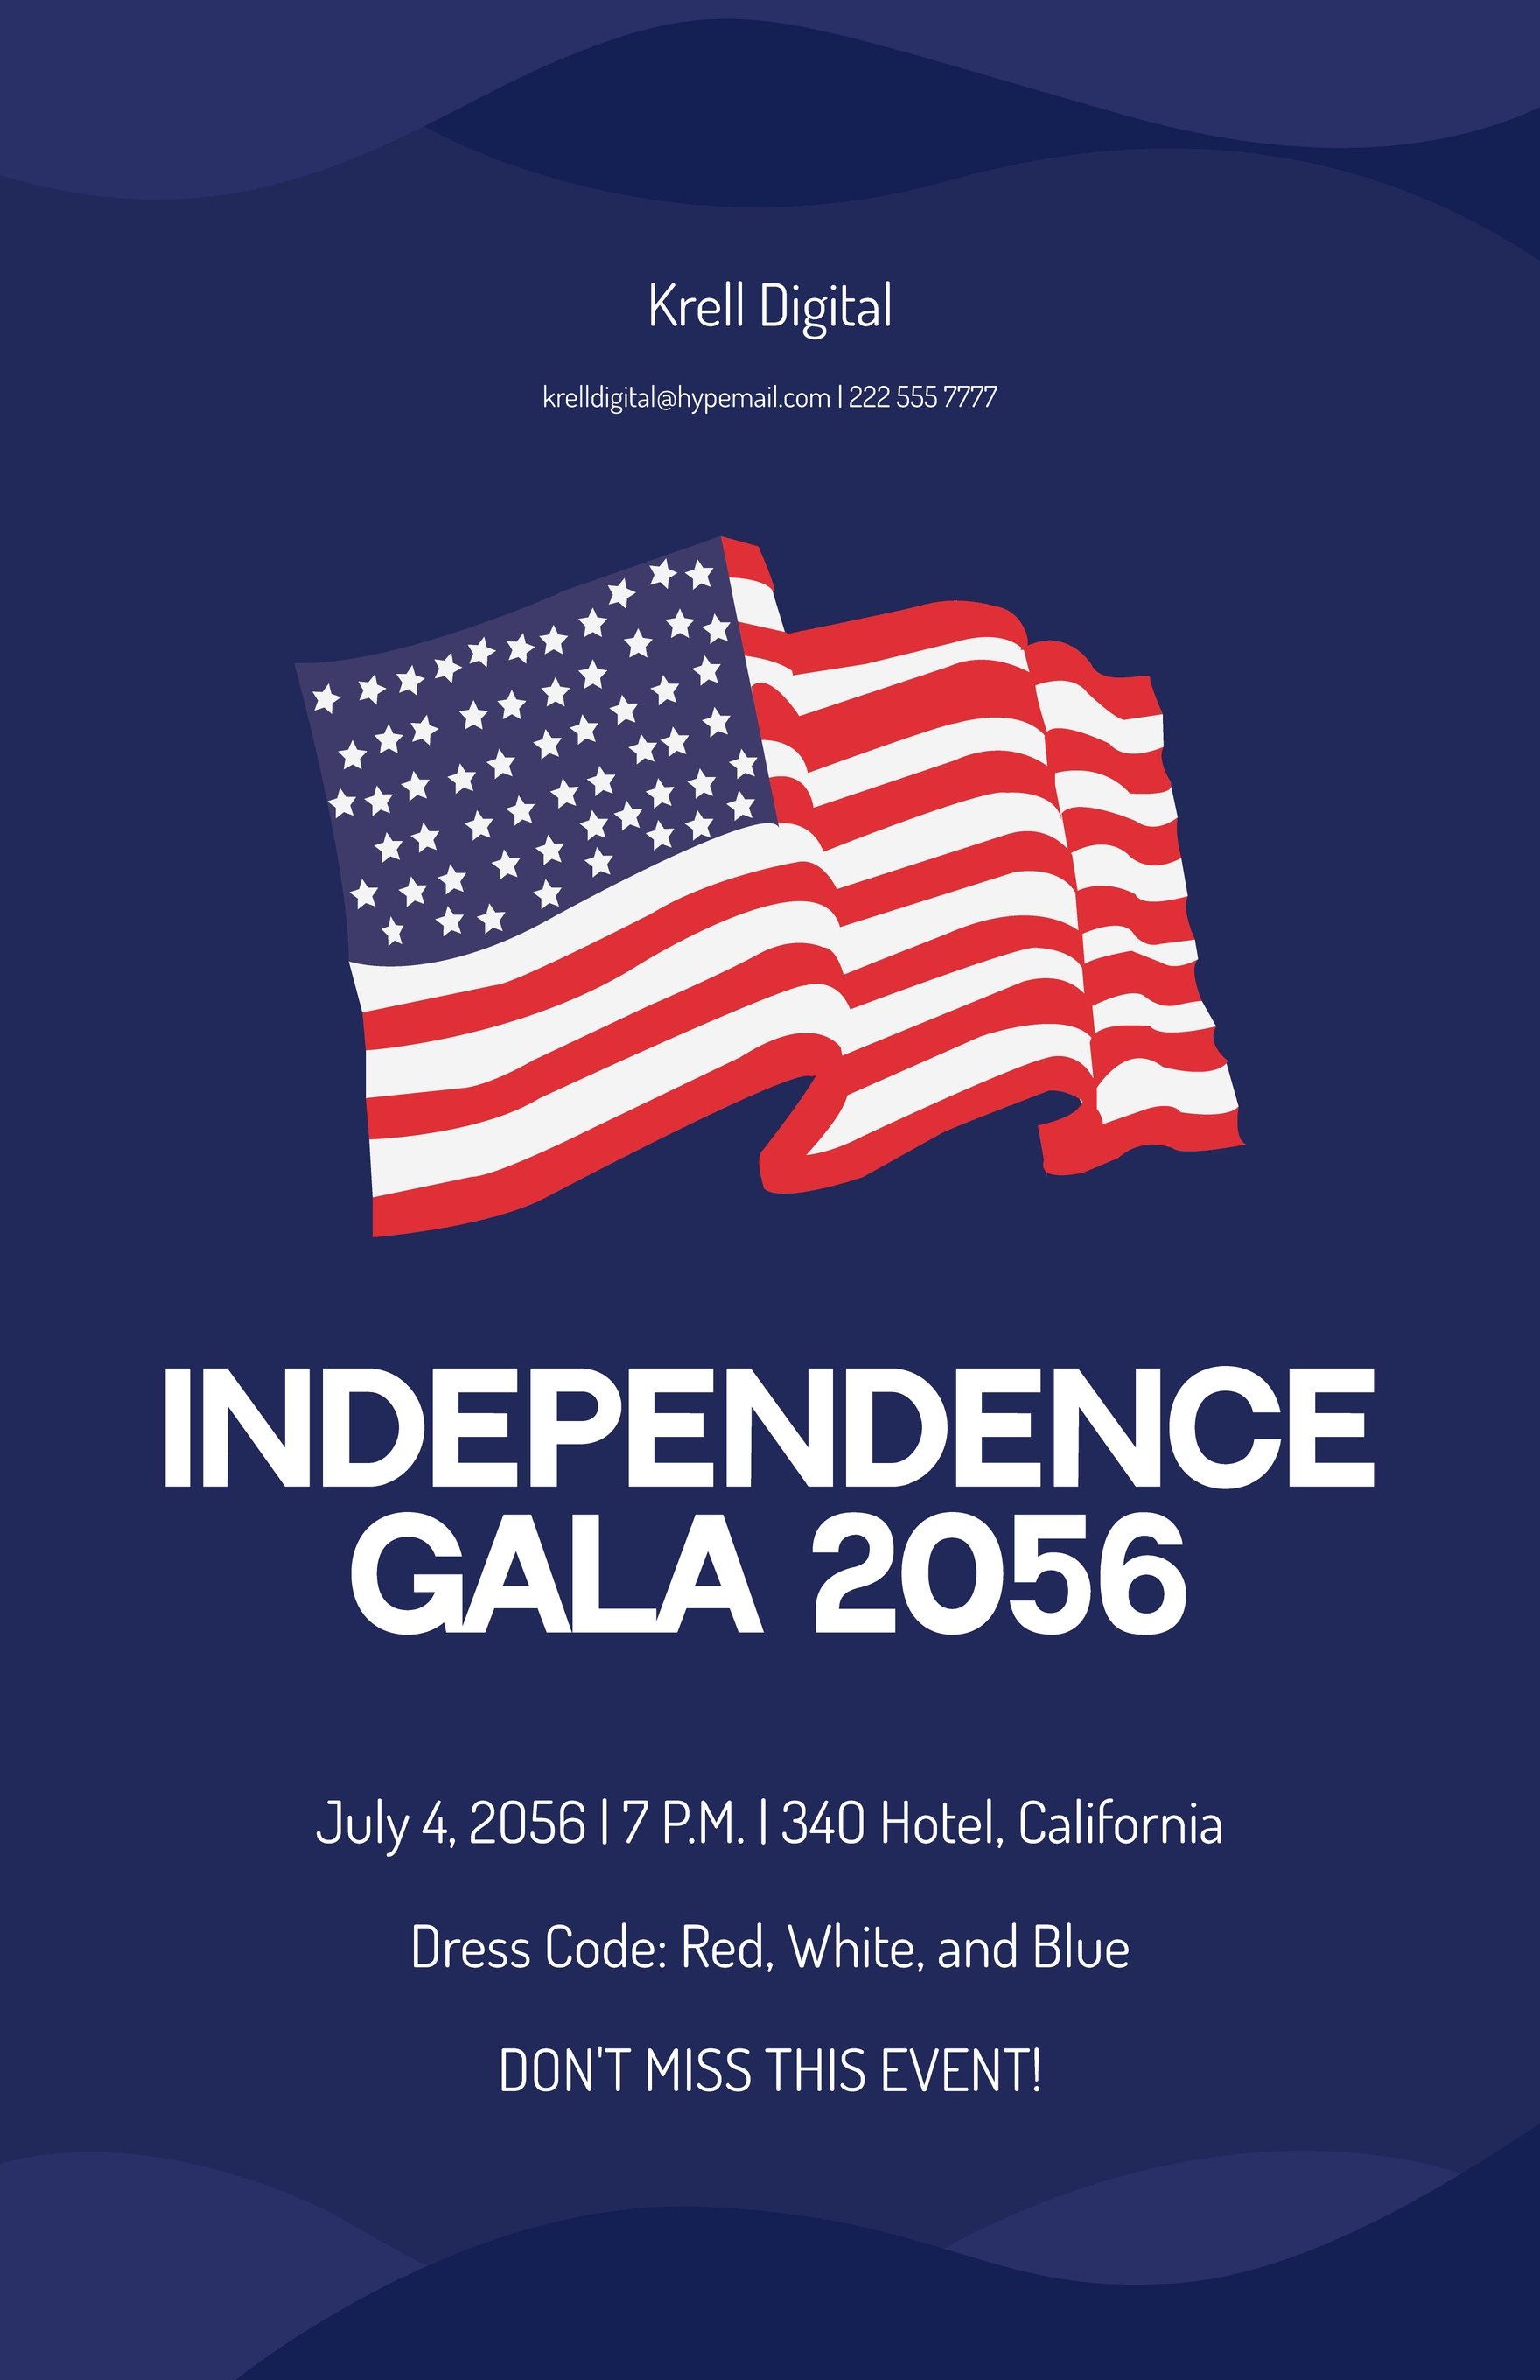 Independence Gala Poster Template in Word, Google Docs, Illustrator, PSD, Apple Pages, Publisher